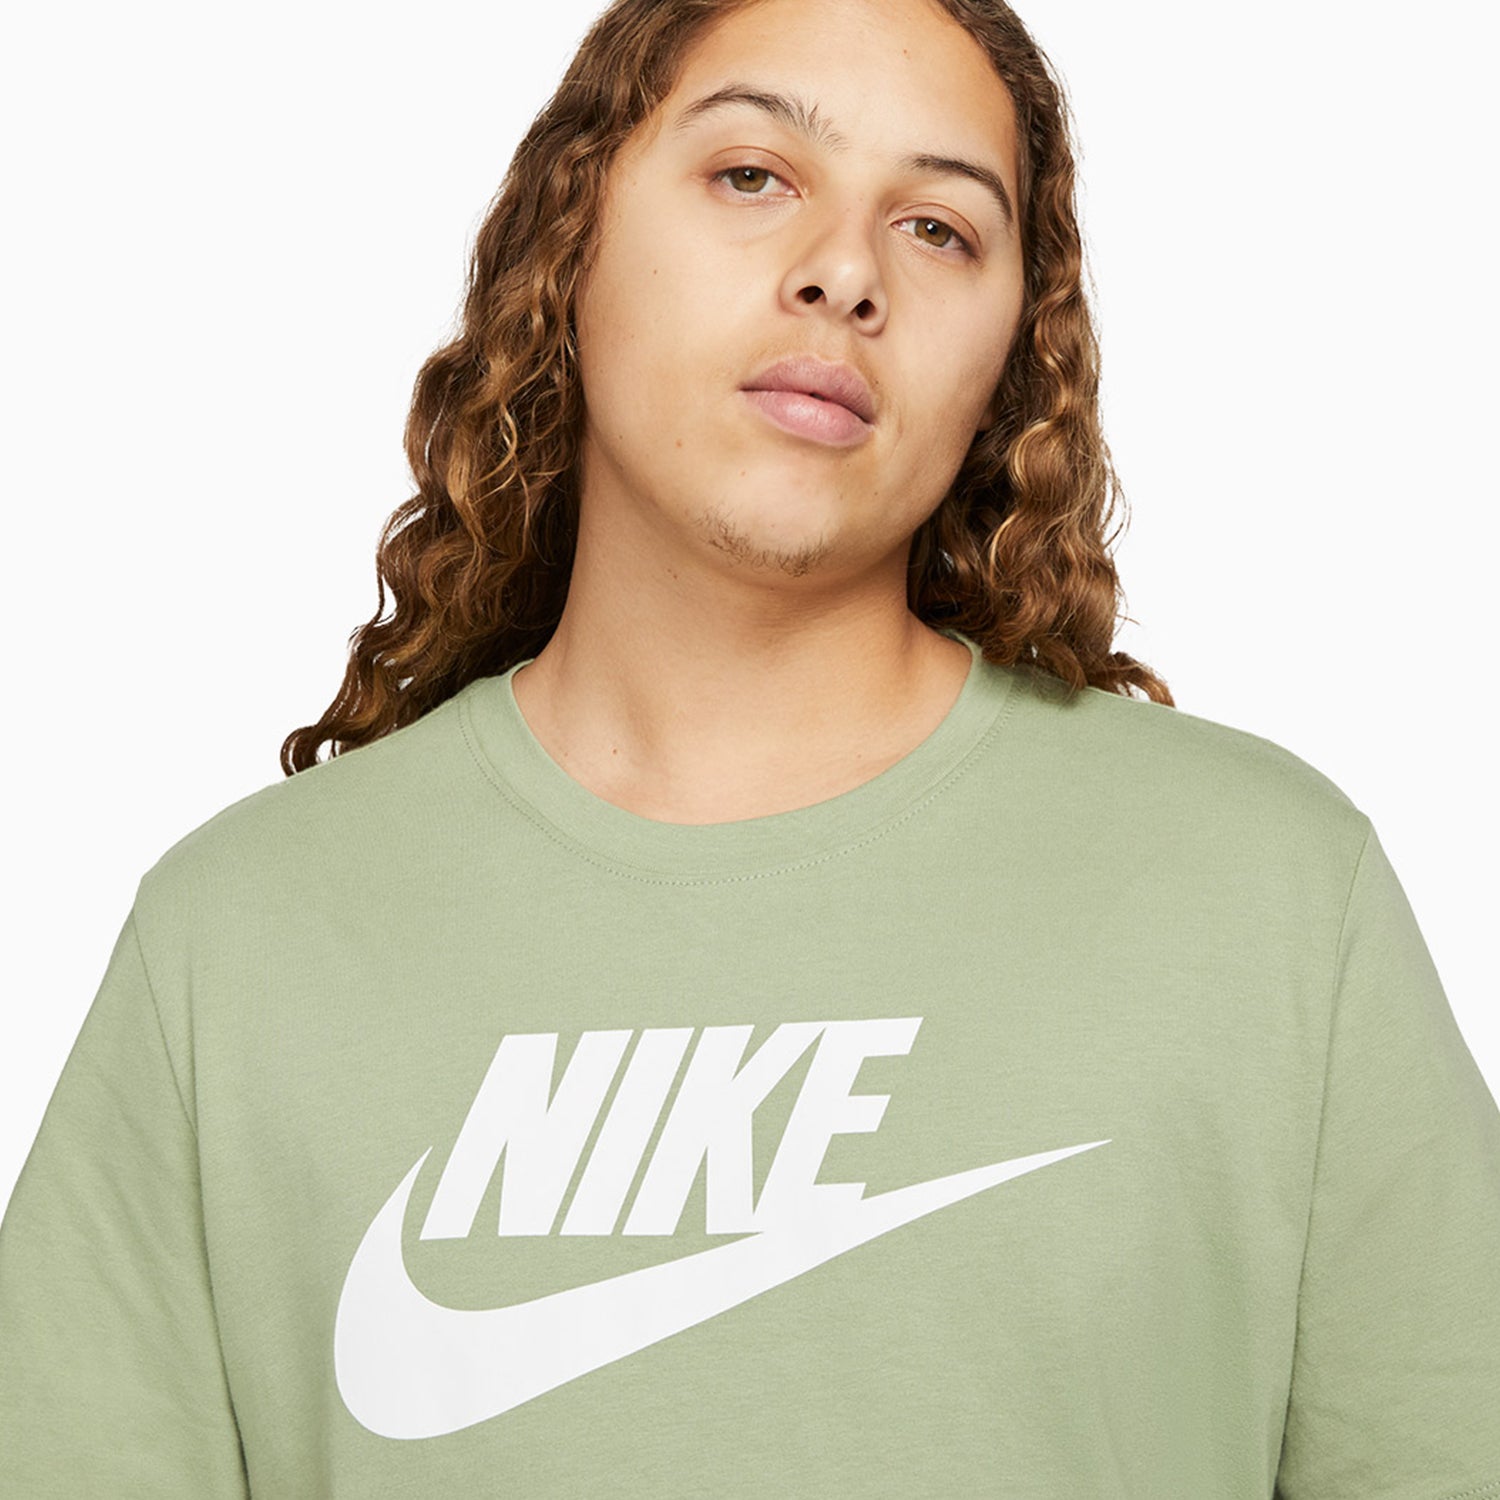 nike-mens-nike-sportswear-t-shirt-and-shorts-outfit-ar5004-386-bv2721-386